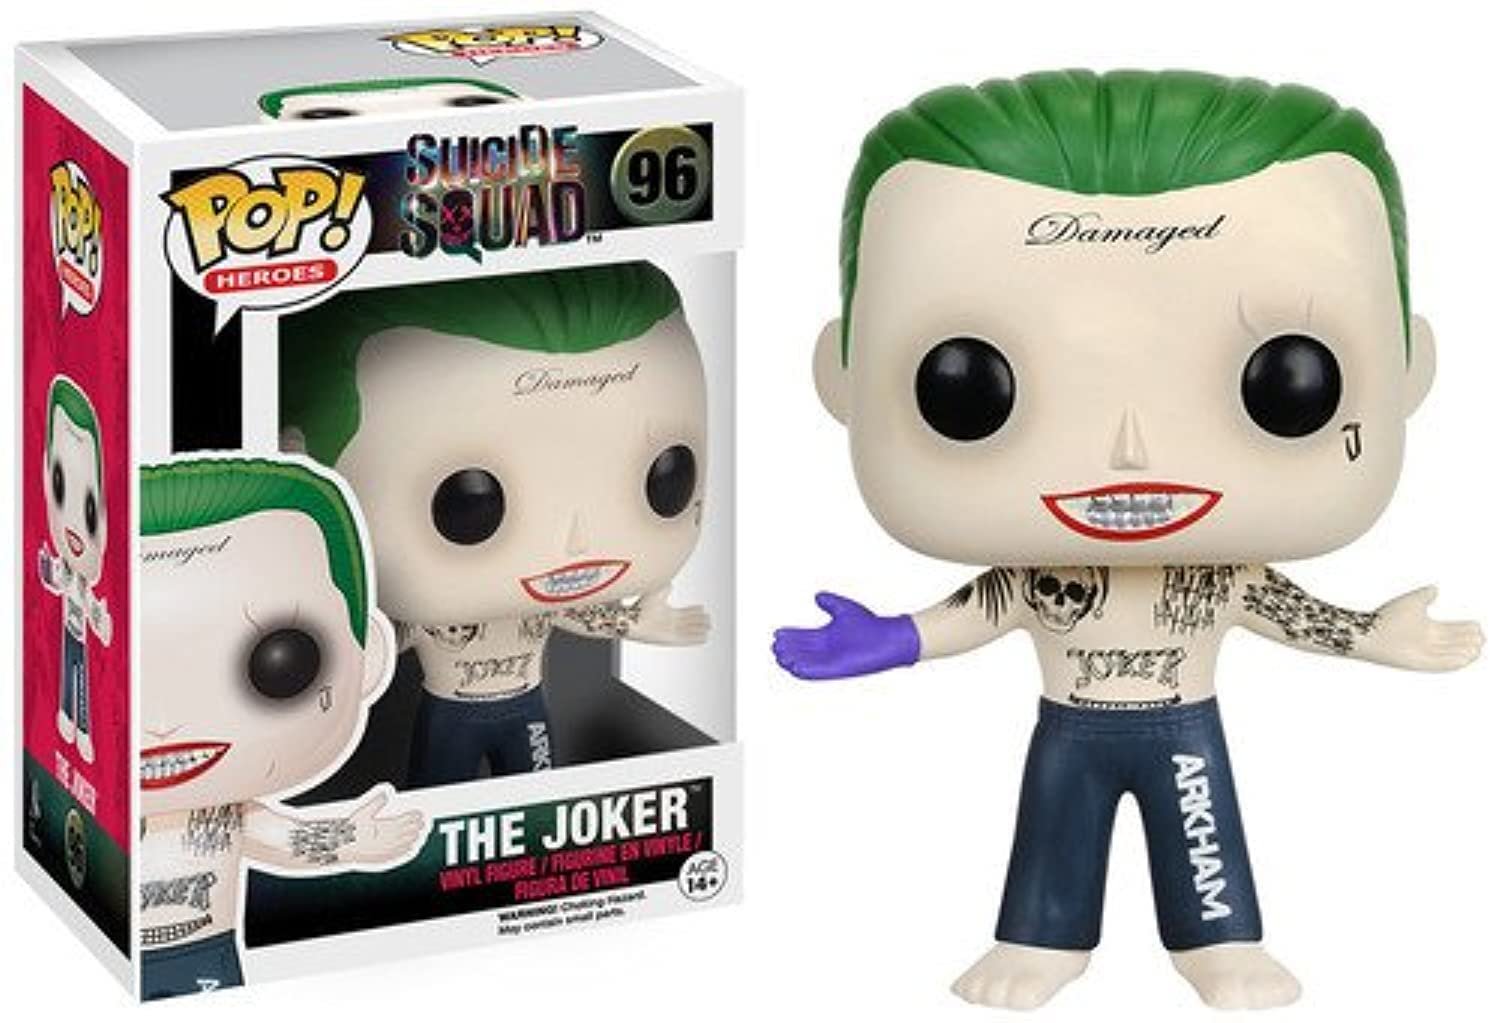 Funko POP Movies: Suicide Squad Action Figure, The Joker Shirtless